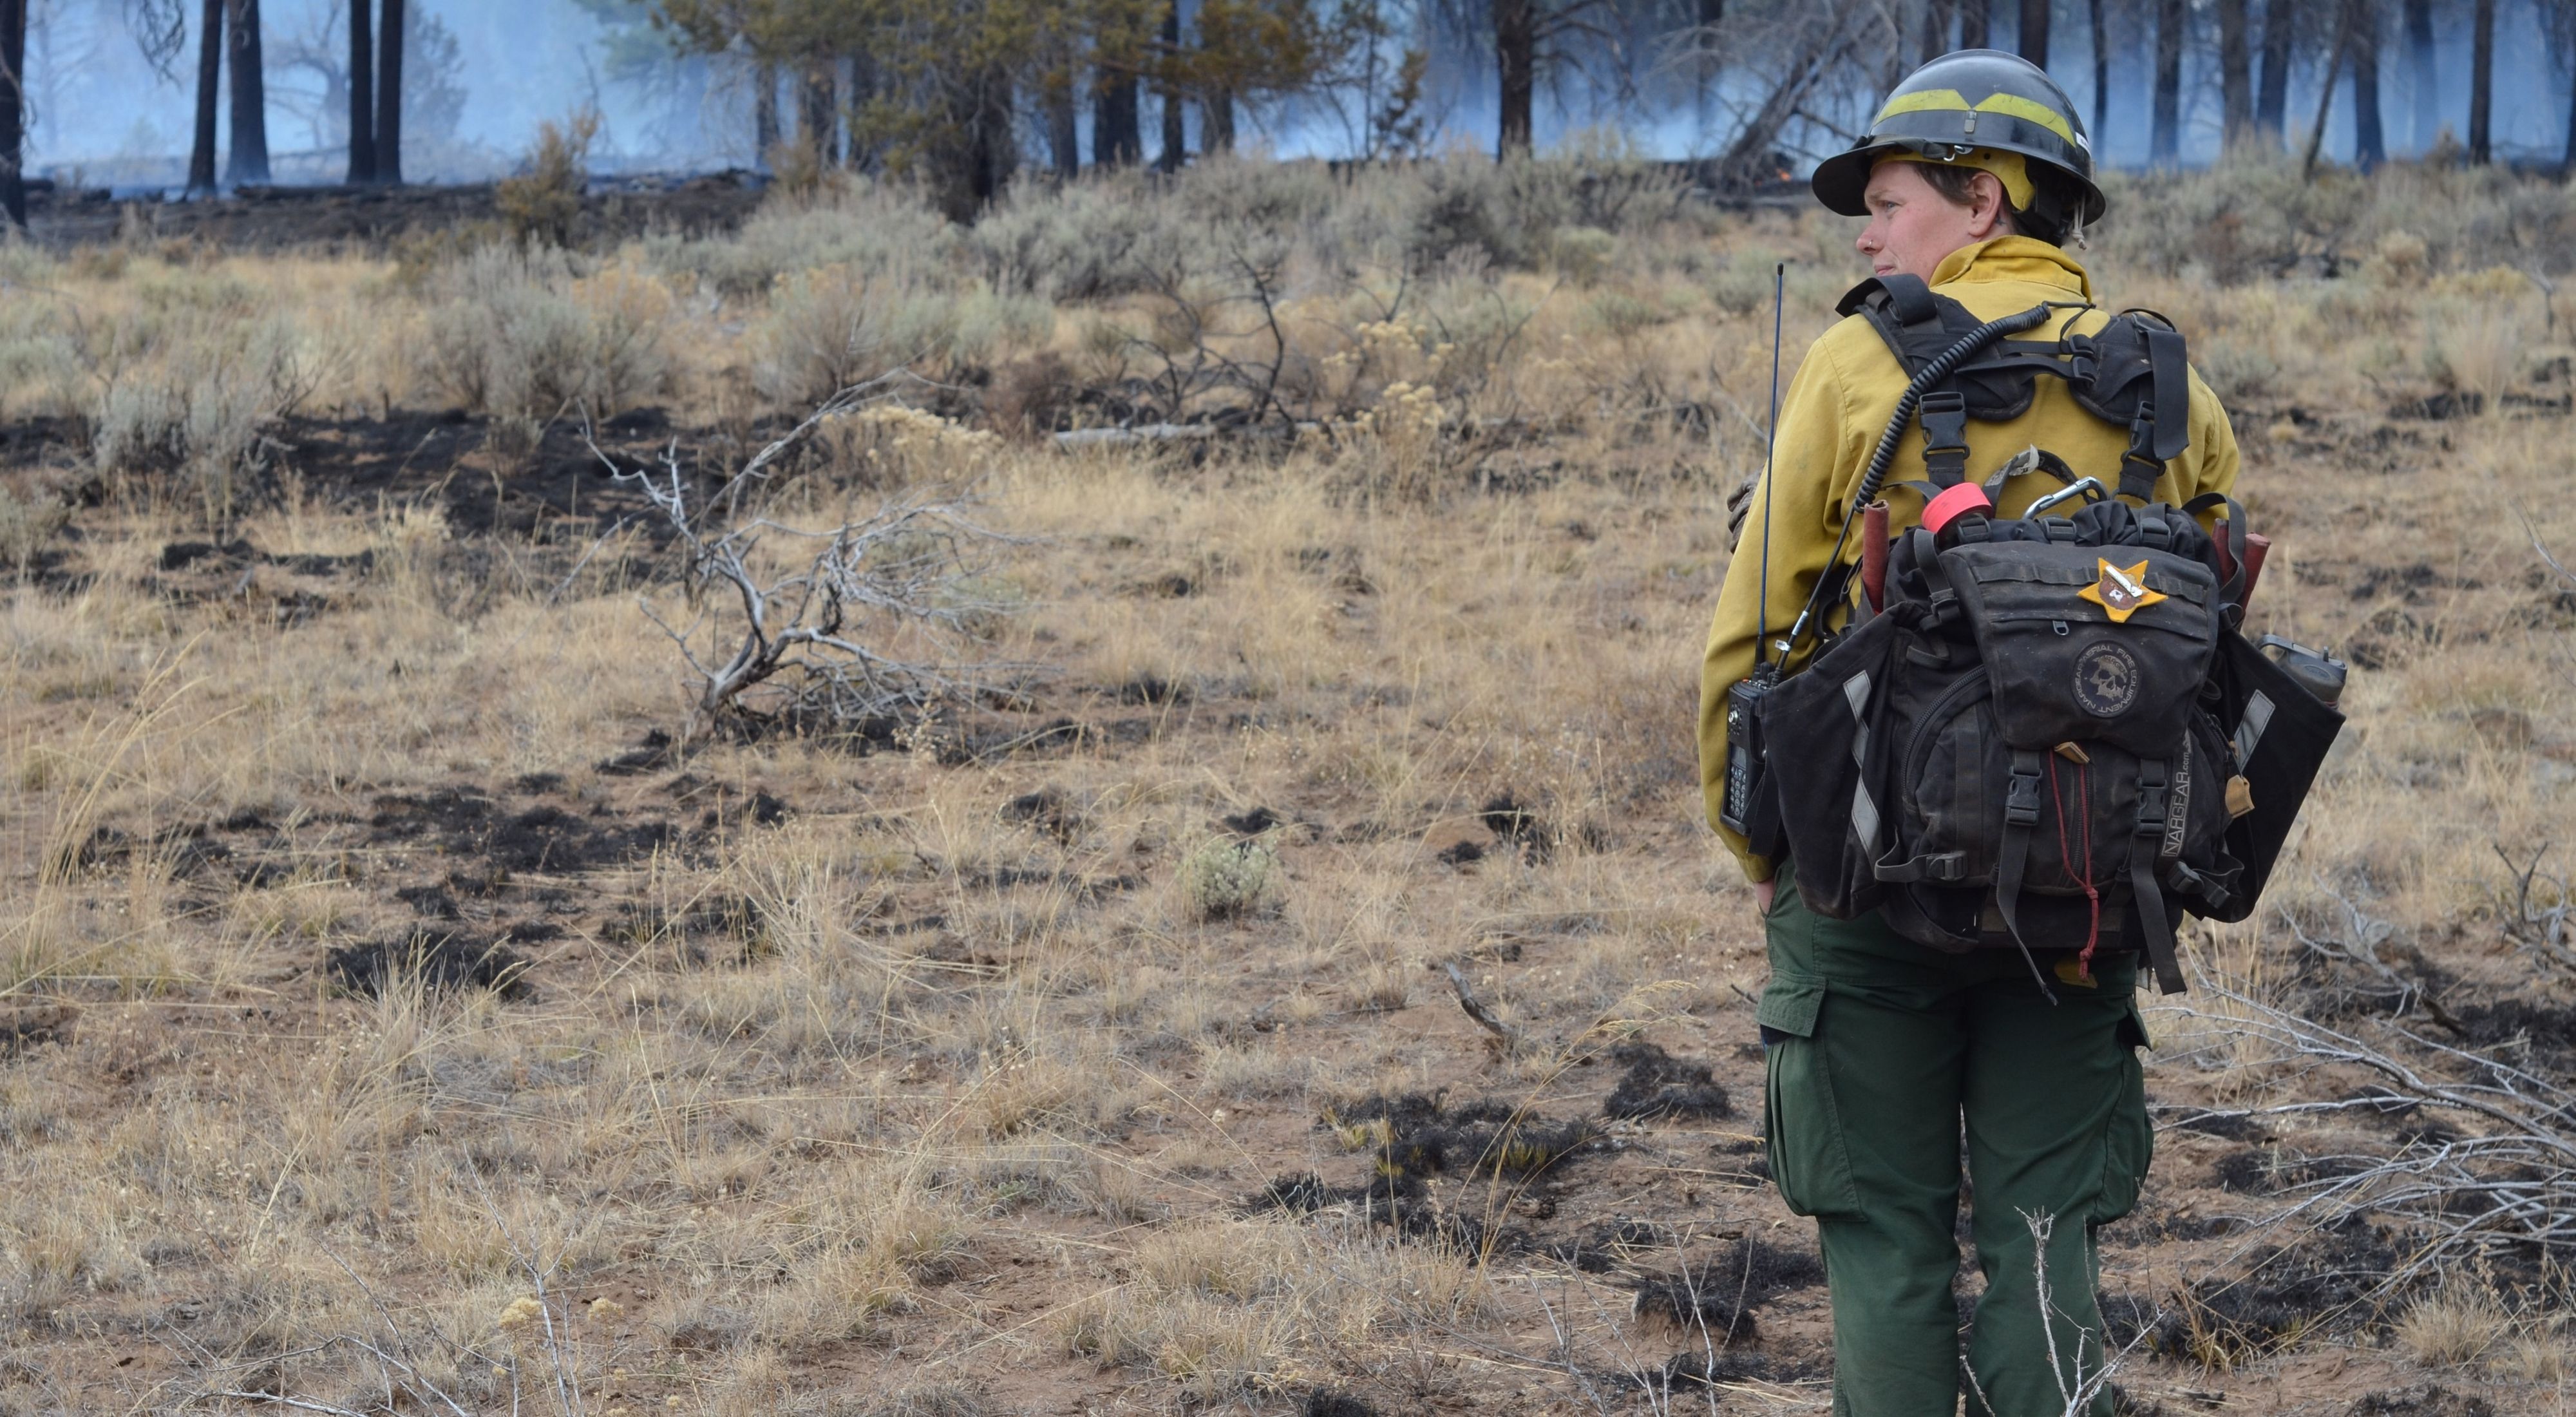 TNC Oregon Burn Boss Katie Sauerbrey stands in fire practitioner gear with her back turned and a forest in front of her.